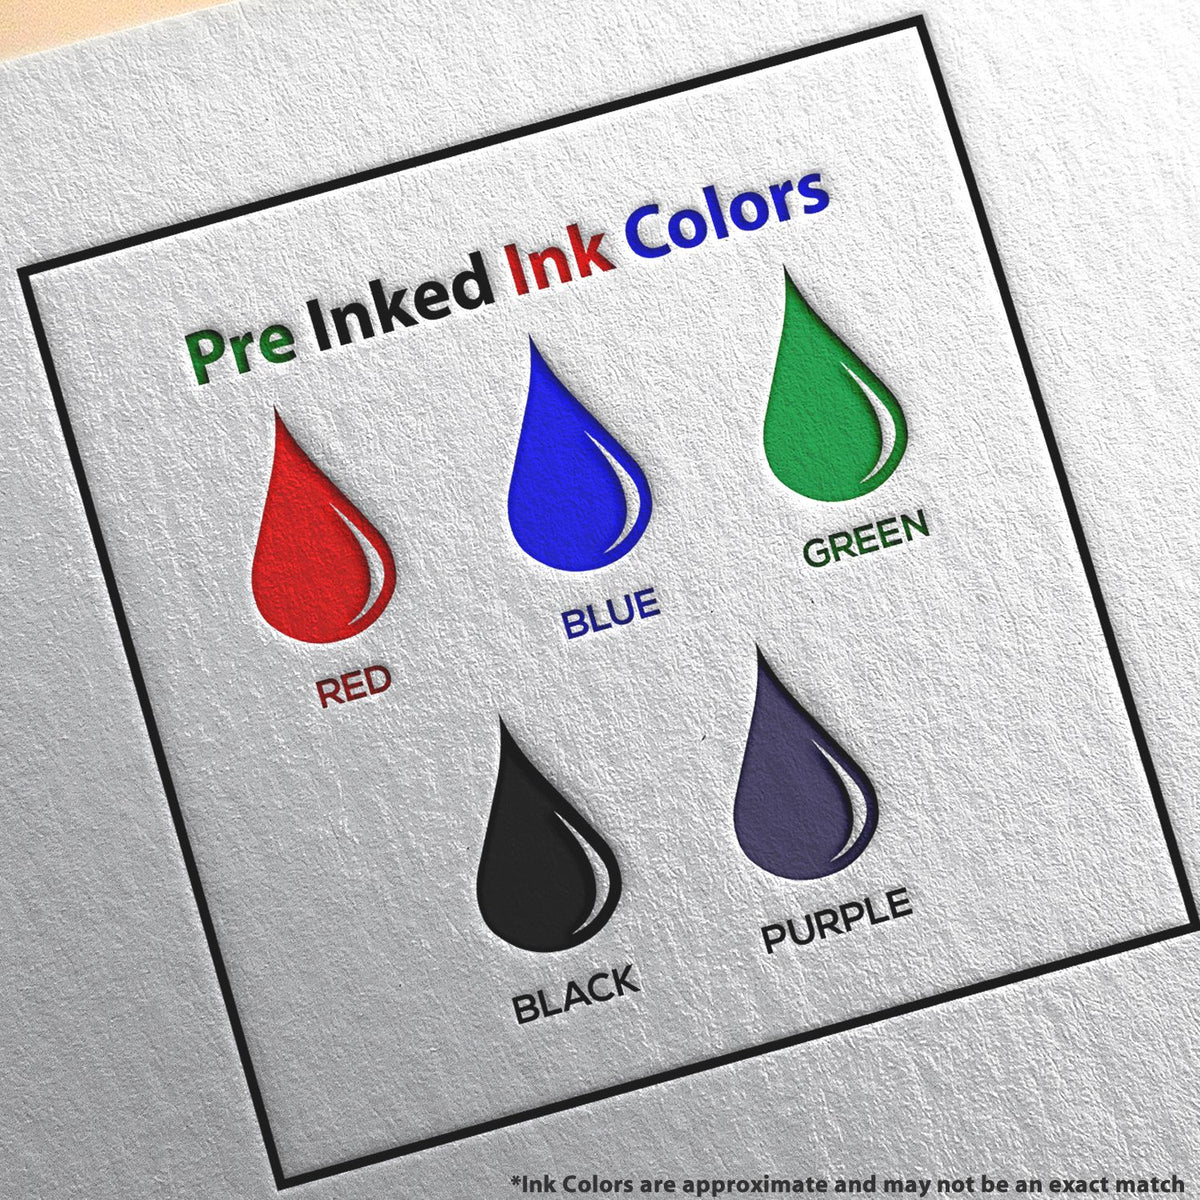 A picture showing the different ink colors or hues available for the Super Slim Connecticut Notary Public Stamp product.